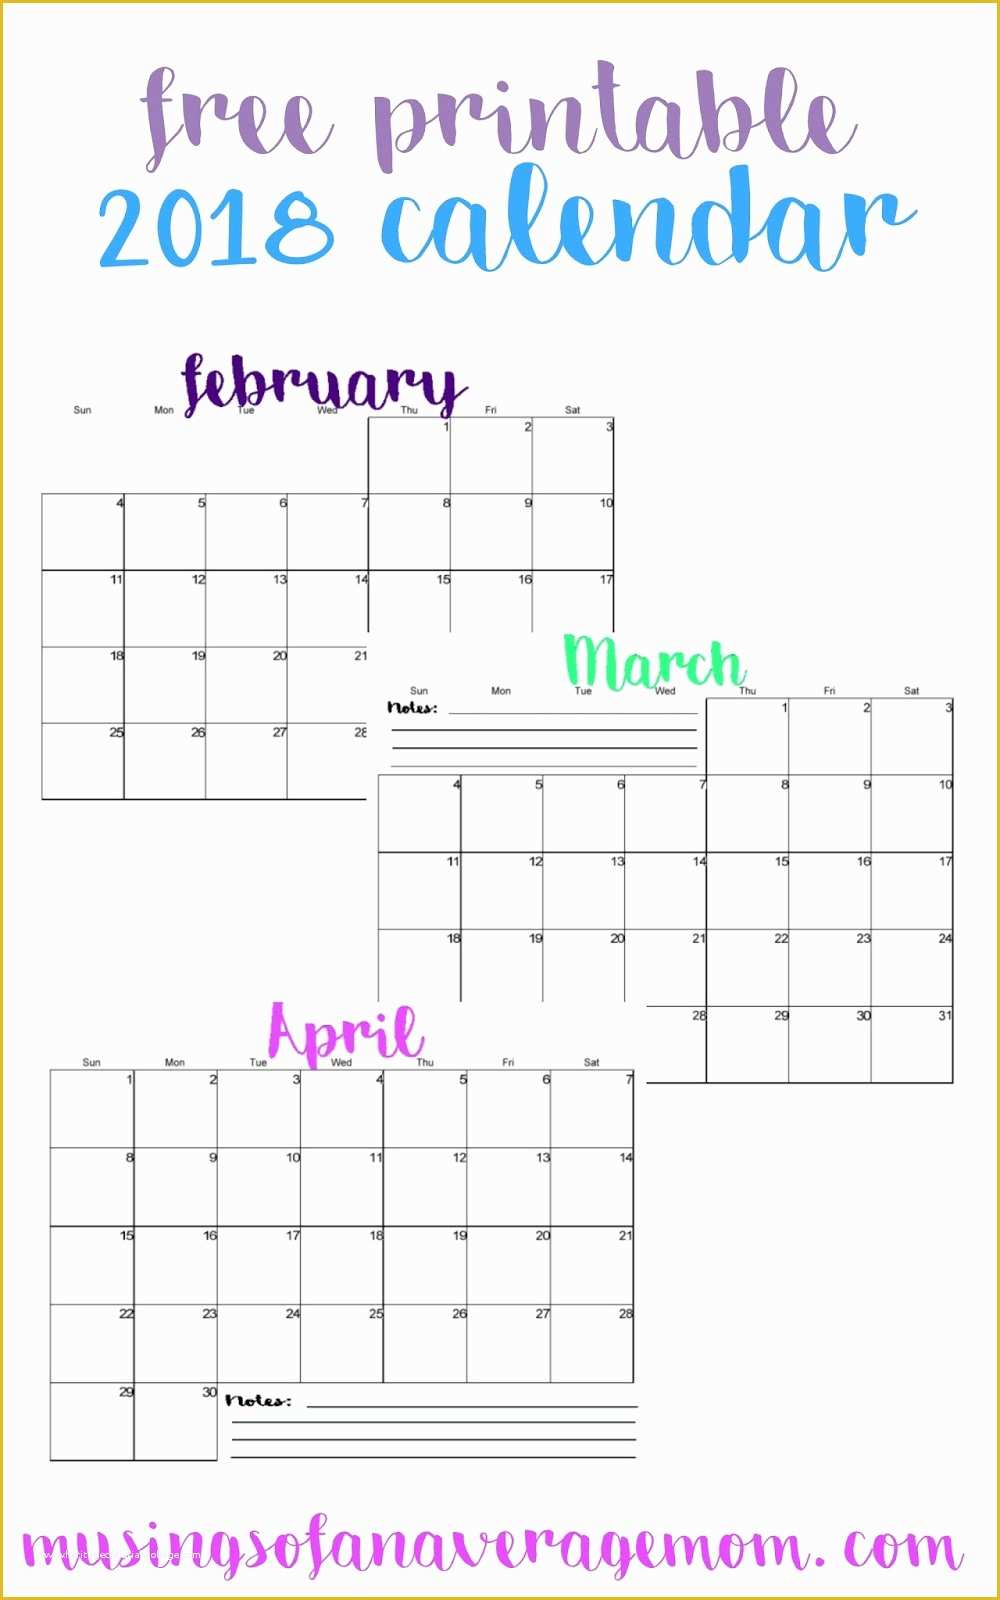 Free Printable Monthly Calendar Templates 2018 Of Calendar 2018 Monthly Printable toreto